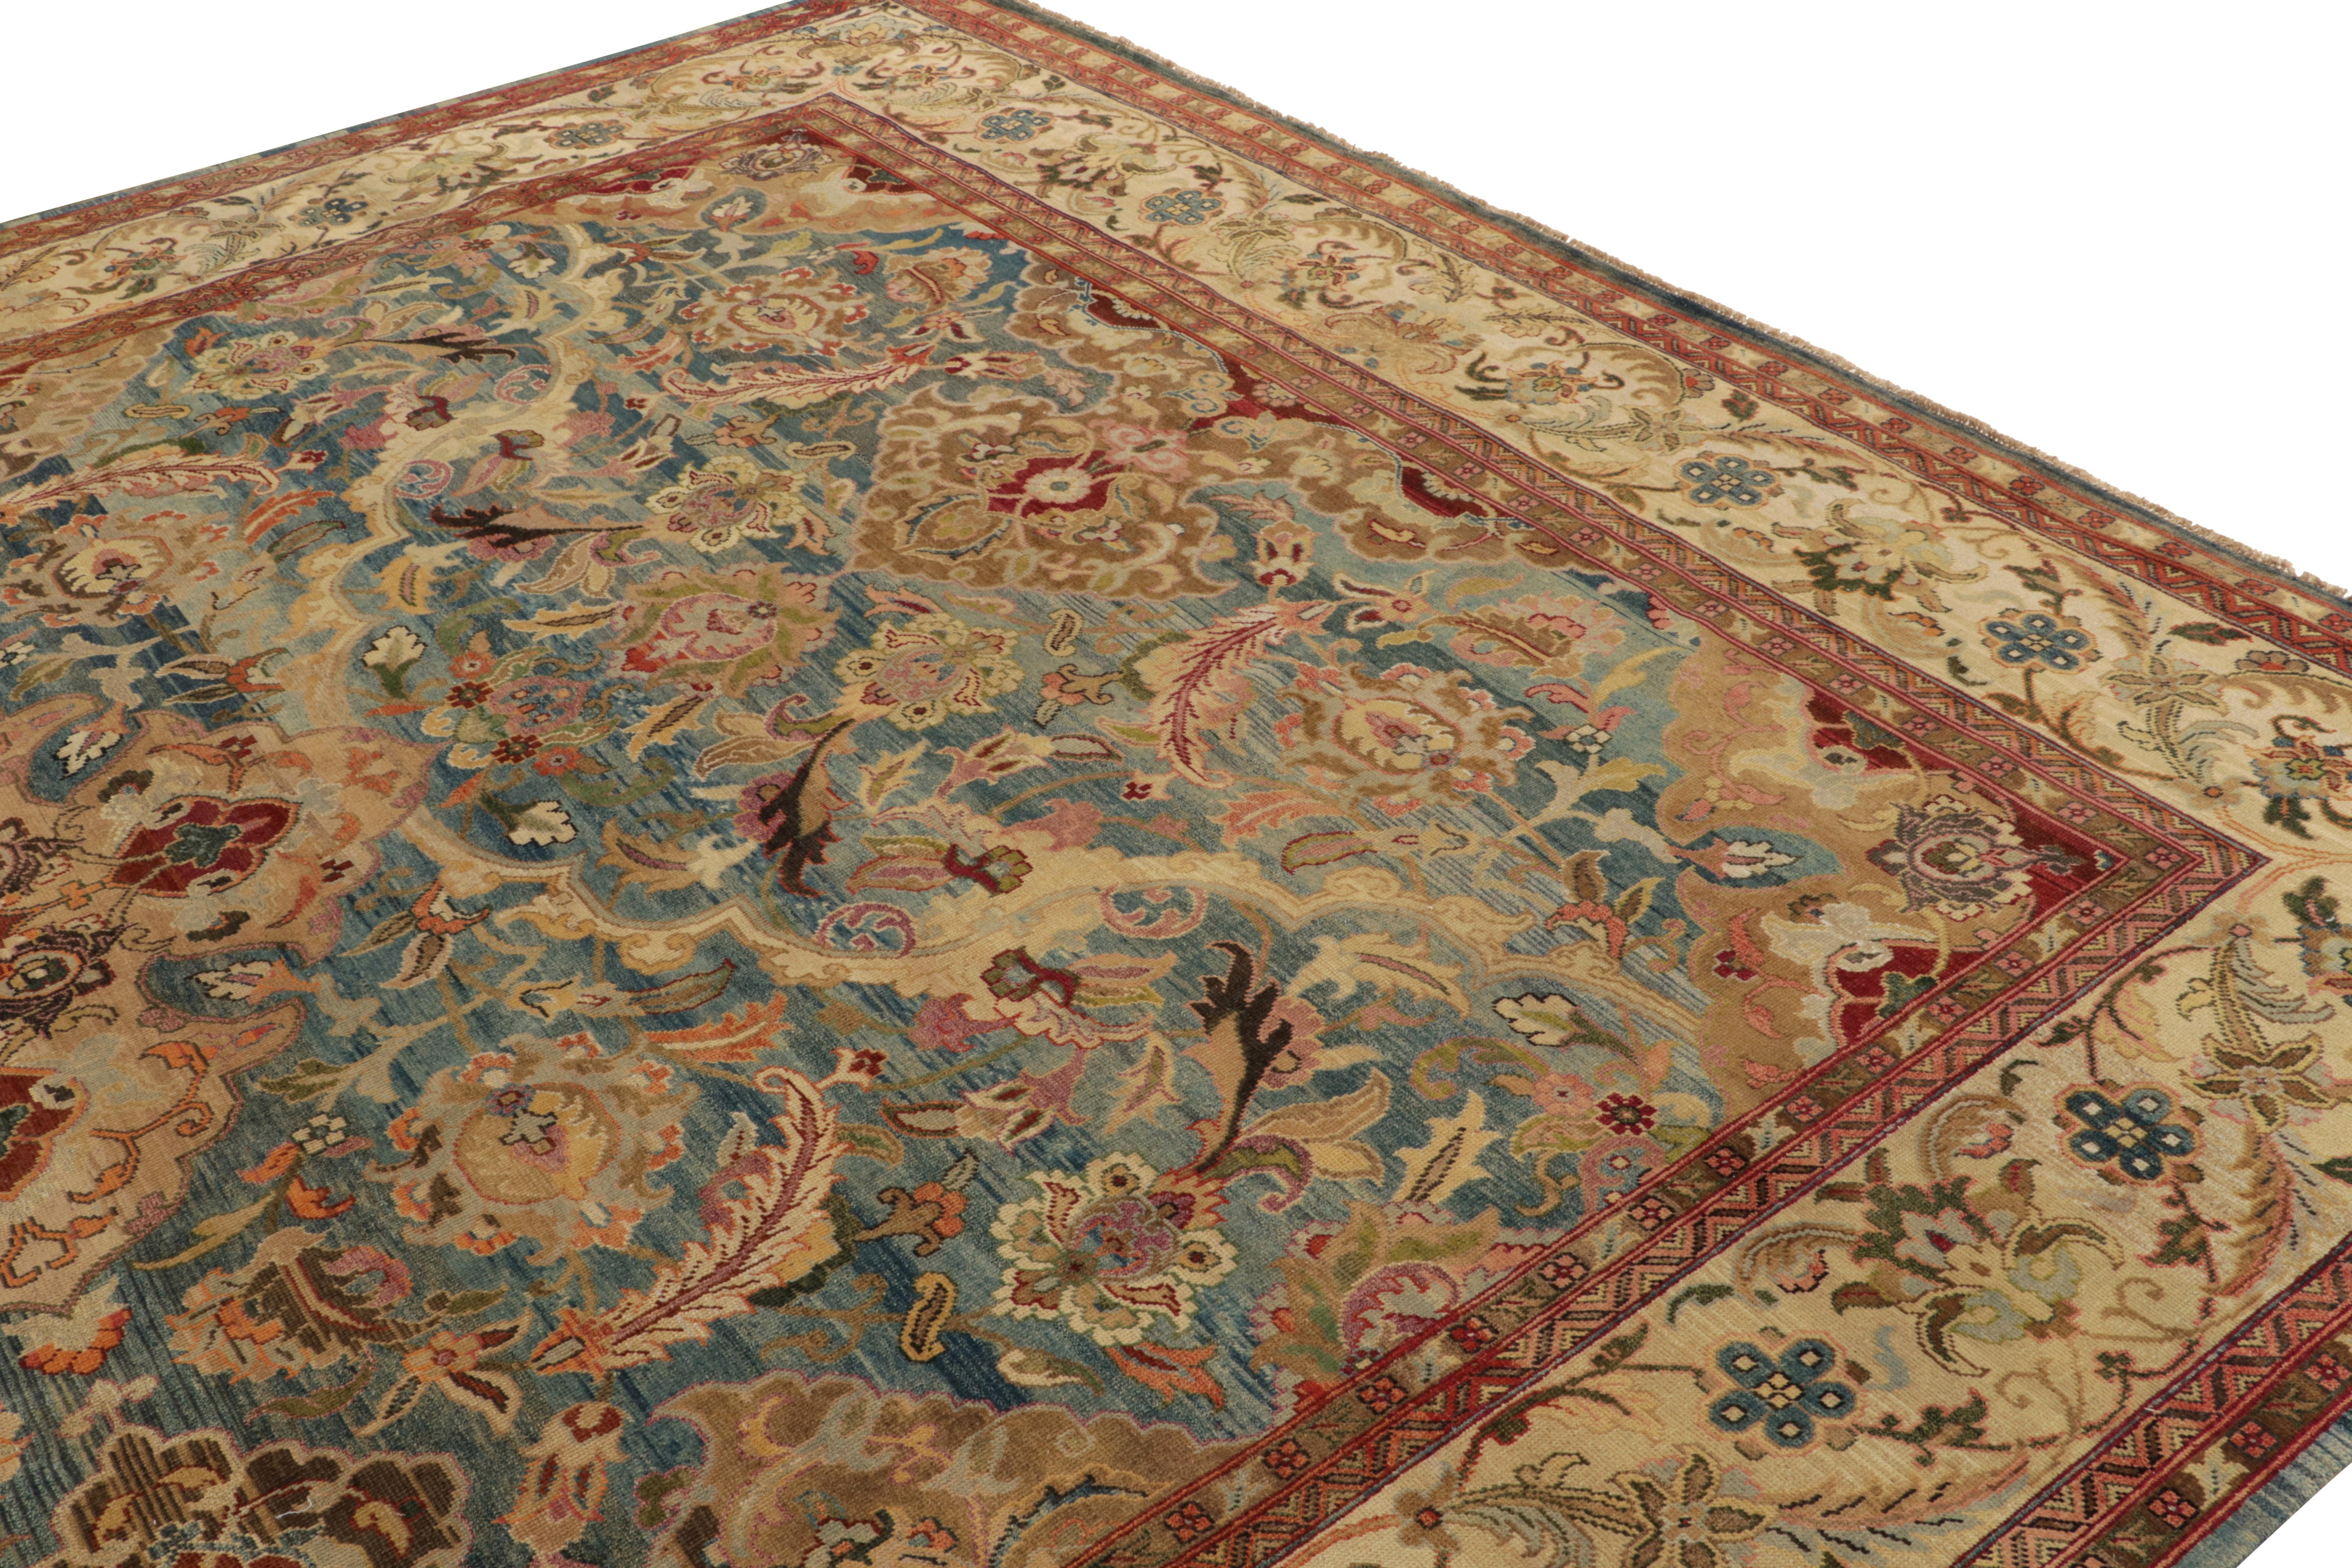 Indian Rug & Kilim’s Classic Persian style rug in Blue and Beige-Brown Floral Patterns For Sale